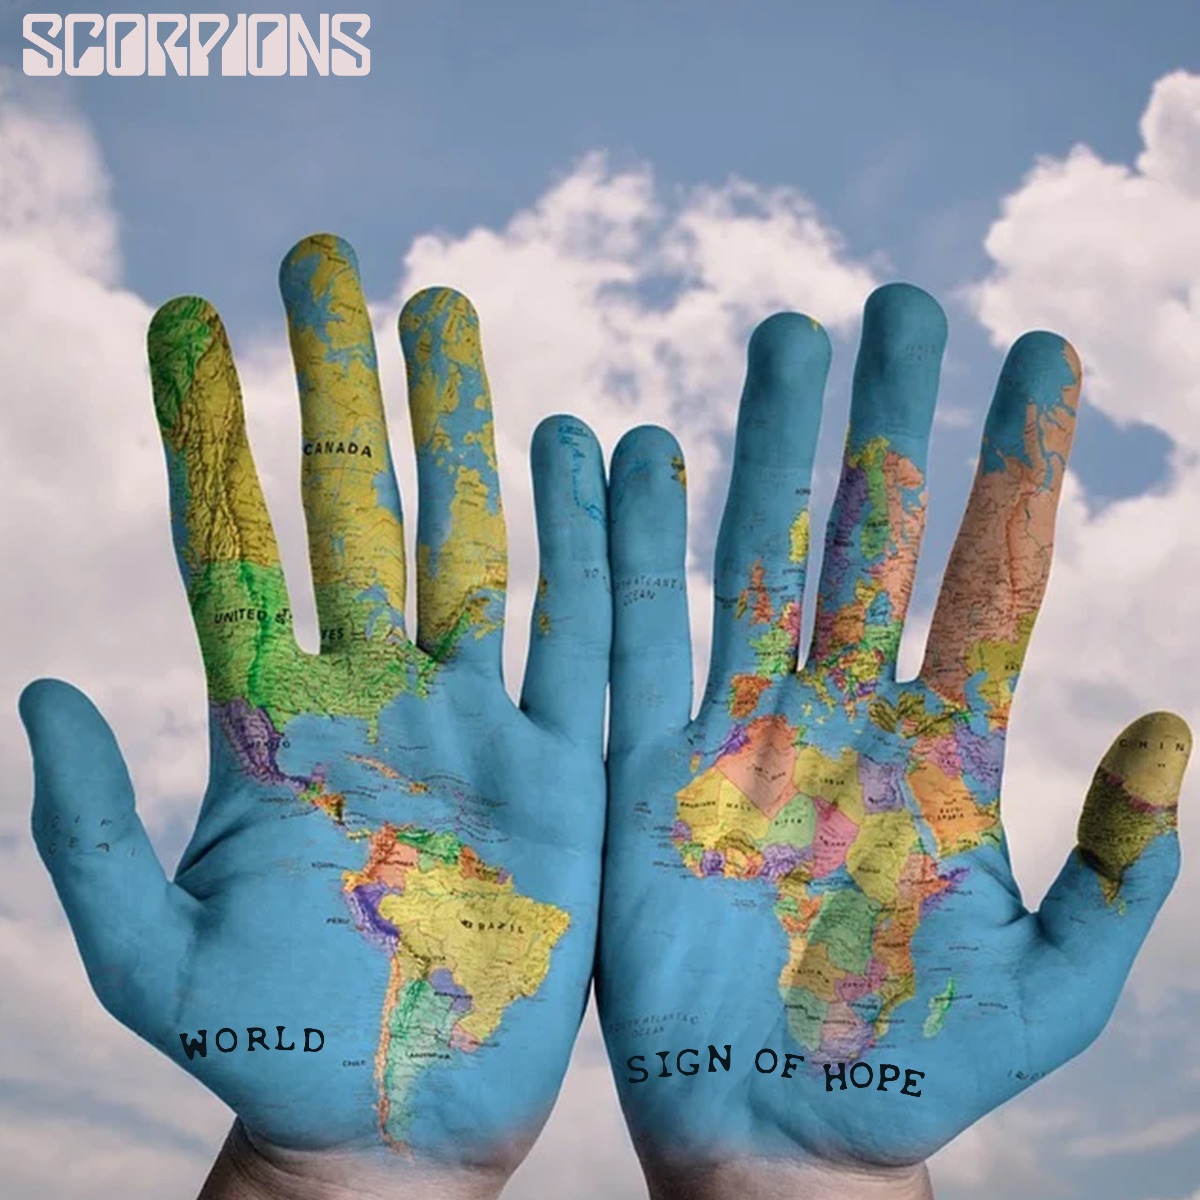 Scorpions Share New Song "Sign Of Hope"